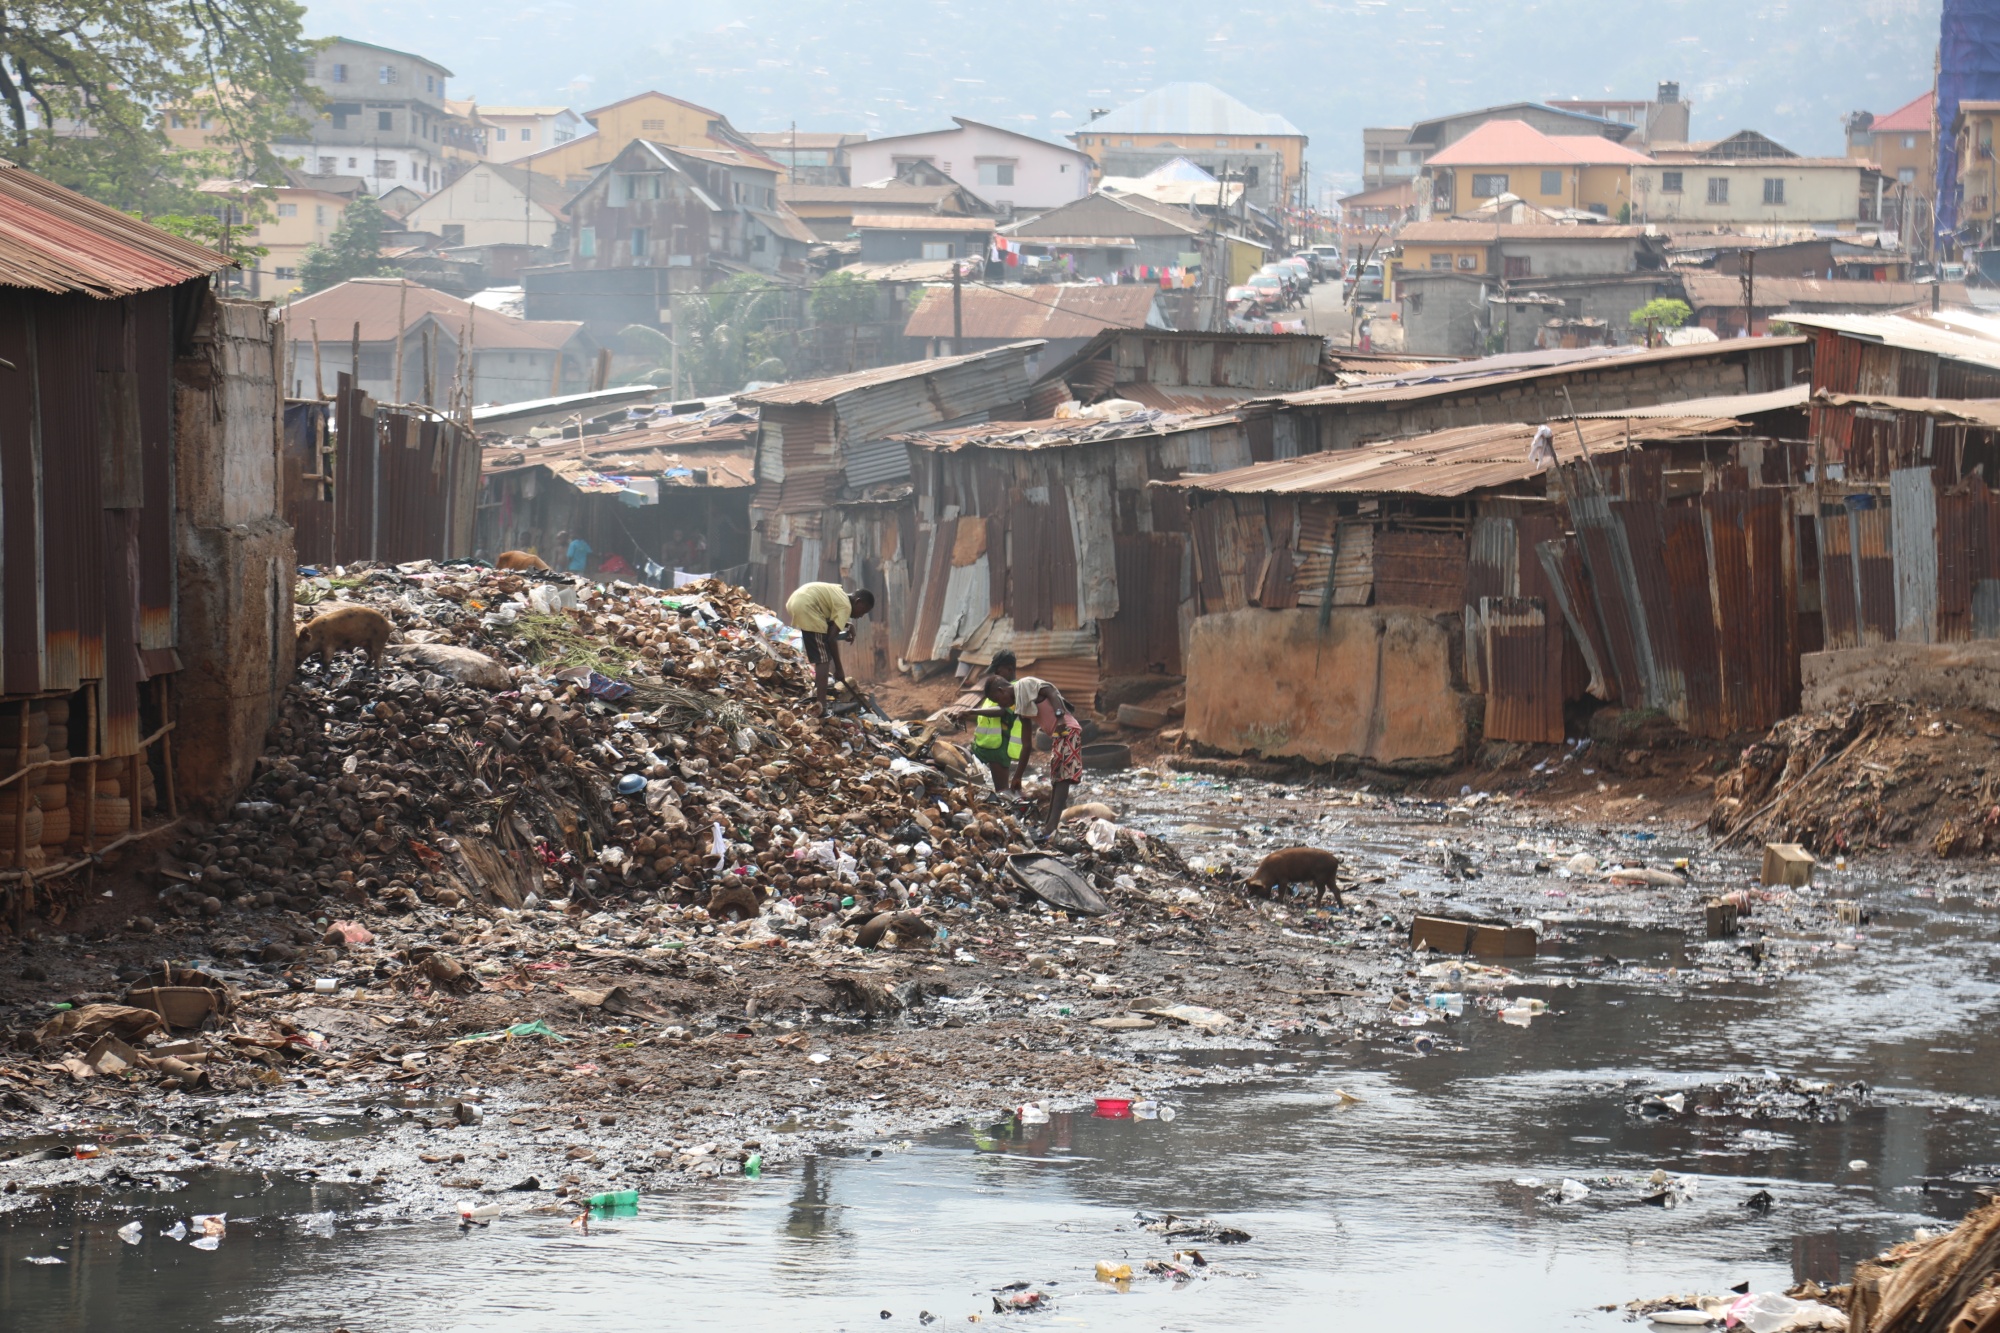 Informal settlements like Kroo Bay serve as home for at least 35% of the population of Freetown, which recently appointed an urban heat officer to help manage the effects of climate change.&nbsp;